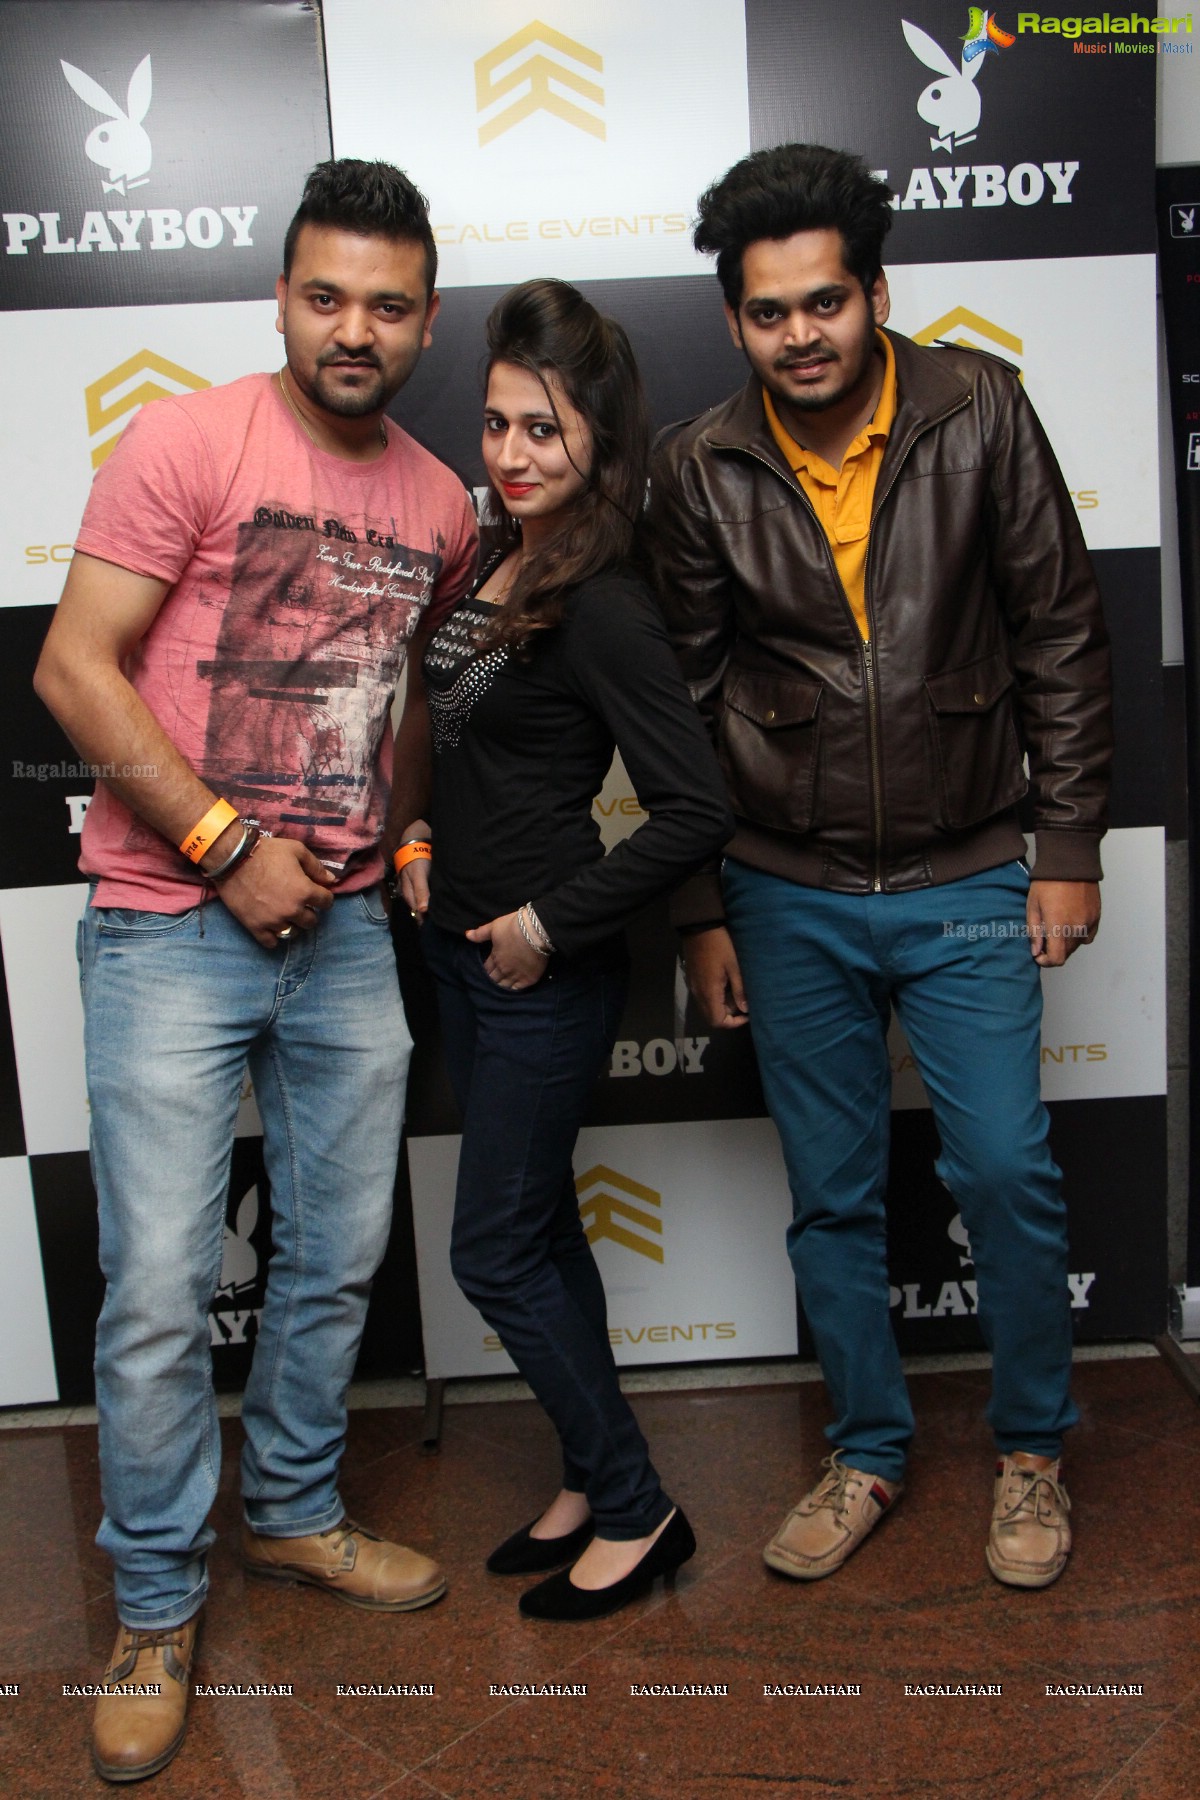 EDM Takeover with Lia-Lisse at Playboy Club, Hyderabad - Event by Scale Events